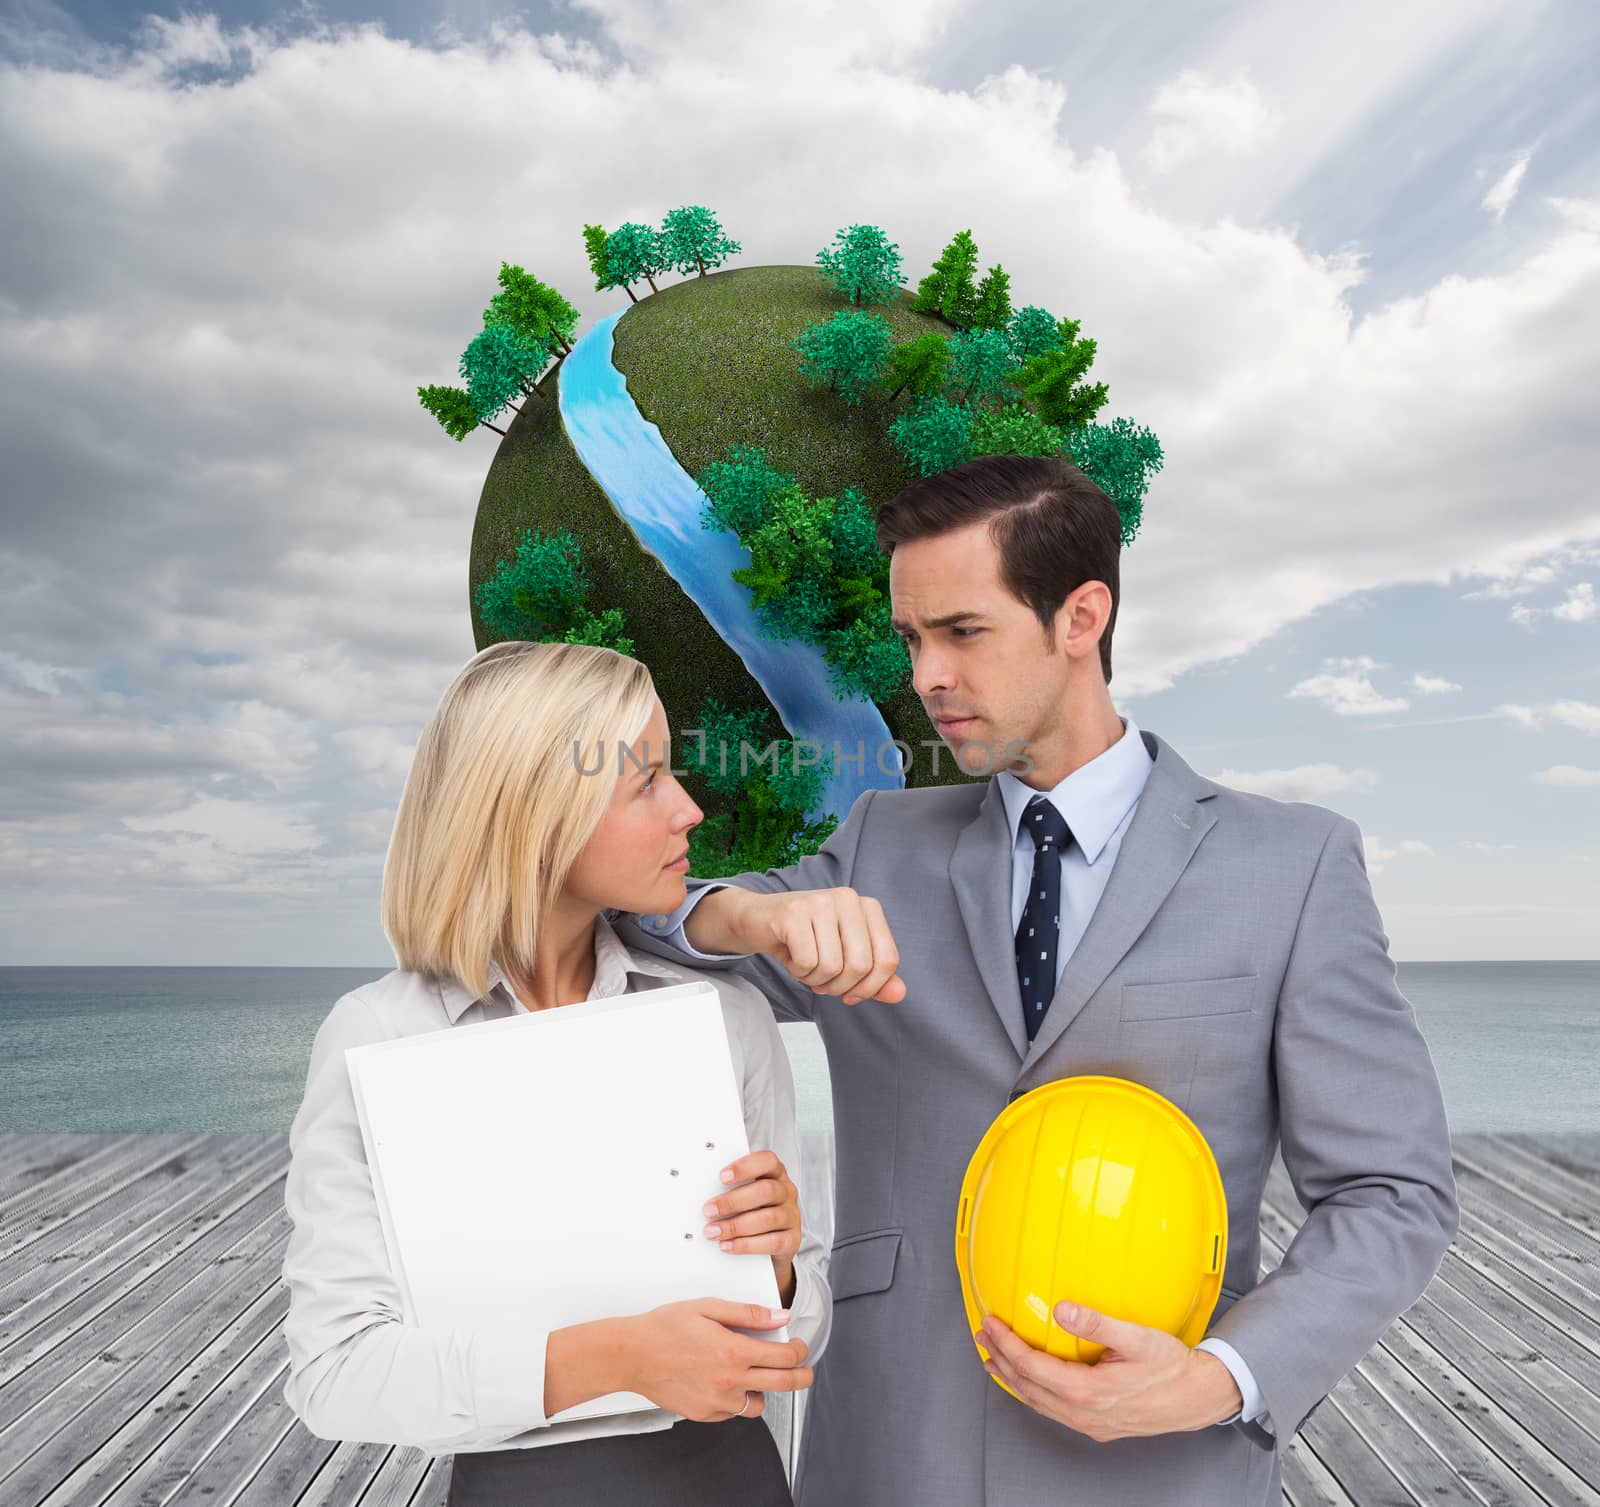 Composite image of architects with plans and hard hat looking at each other by Wavebreakmedia